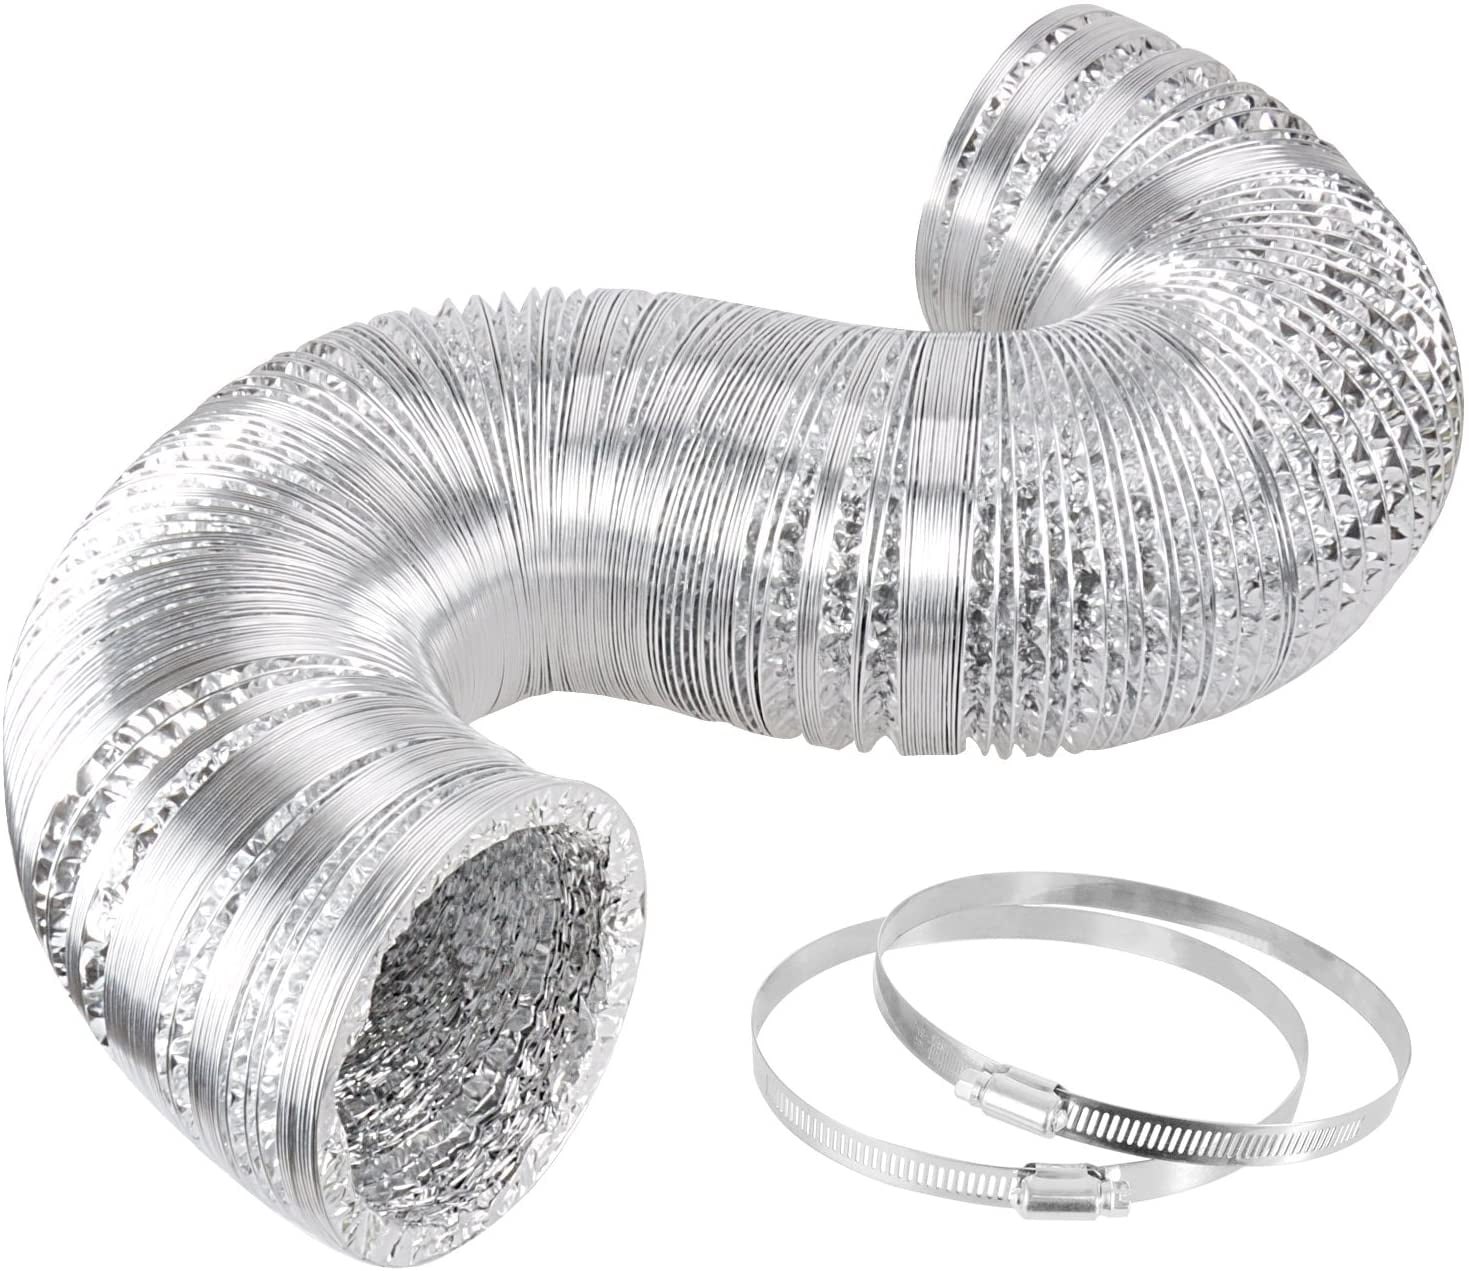 25-Feet Long for Heating Cooling Ventilation and Exhaust Heavy-Duty Four-Layer Protection AC Infinity Flexible 6-Inch Aluminum Ducting 